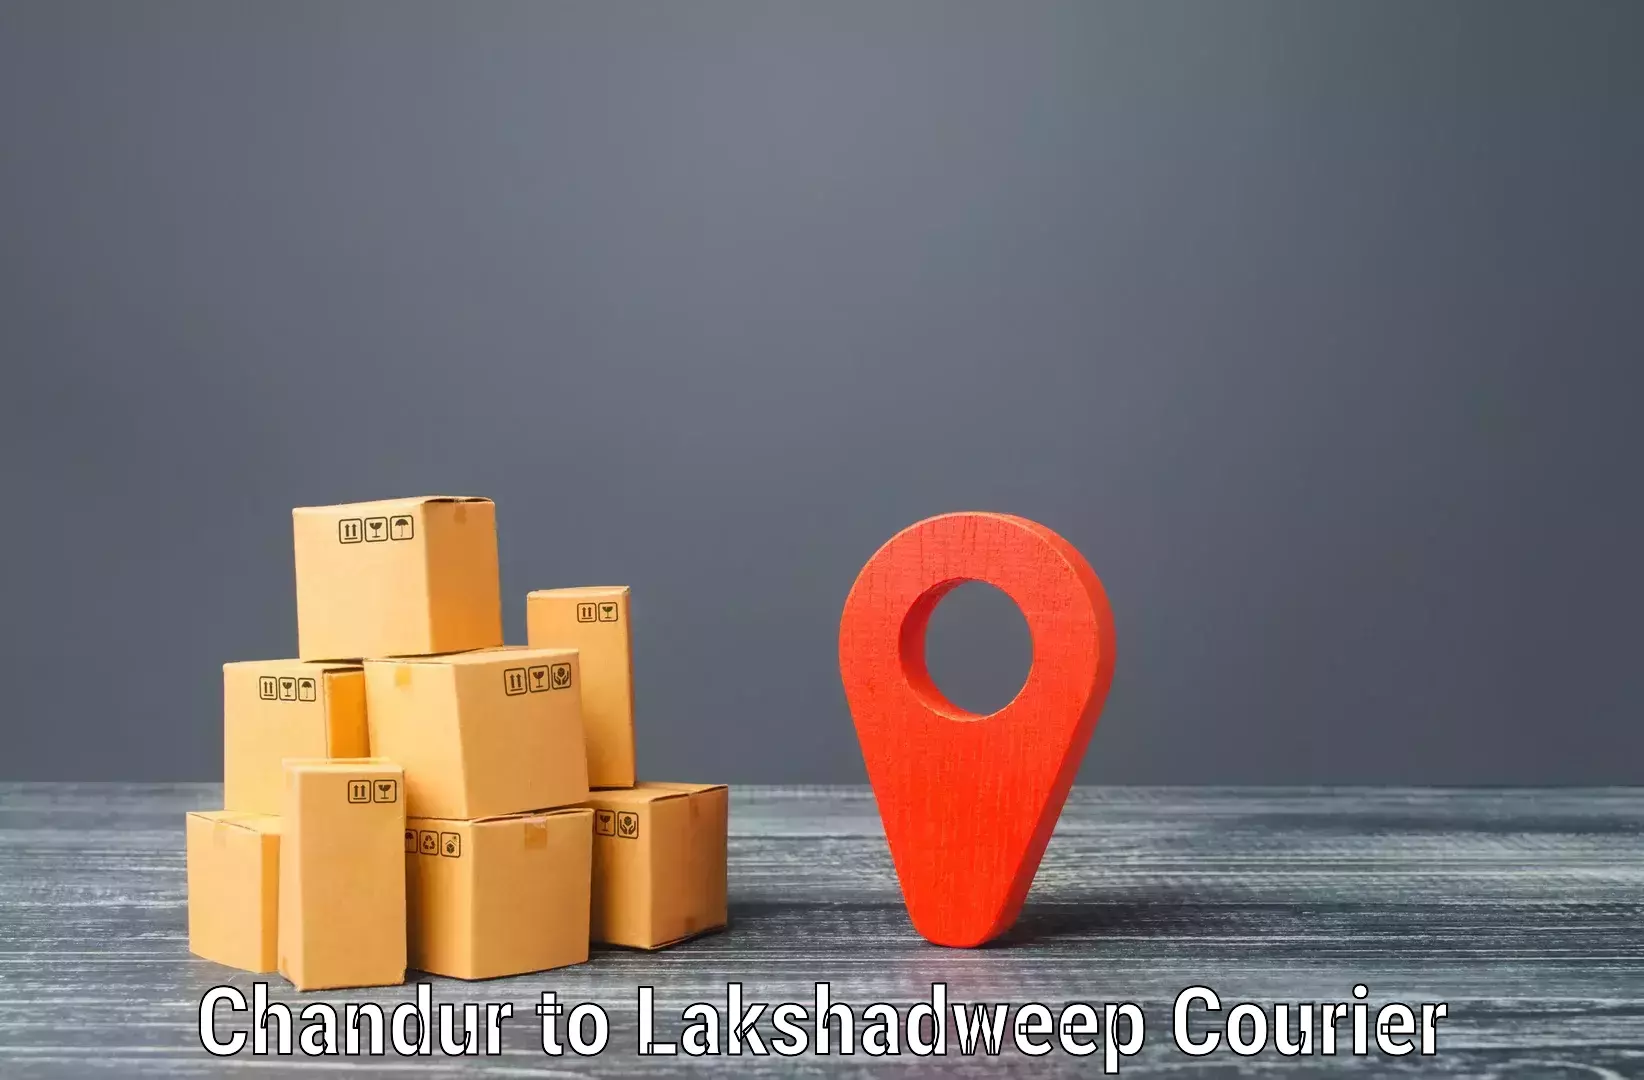 Small parcel delivery in Chandur to Lakshadweep